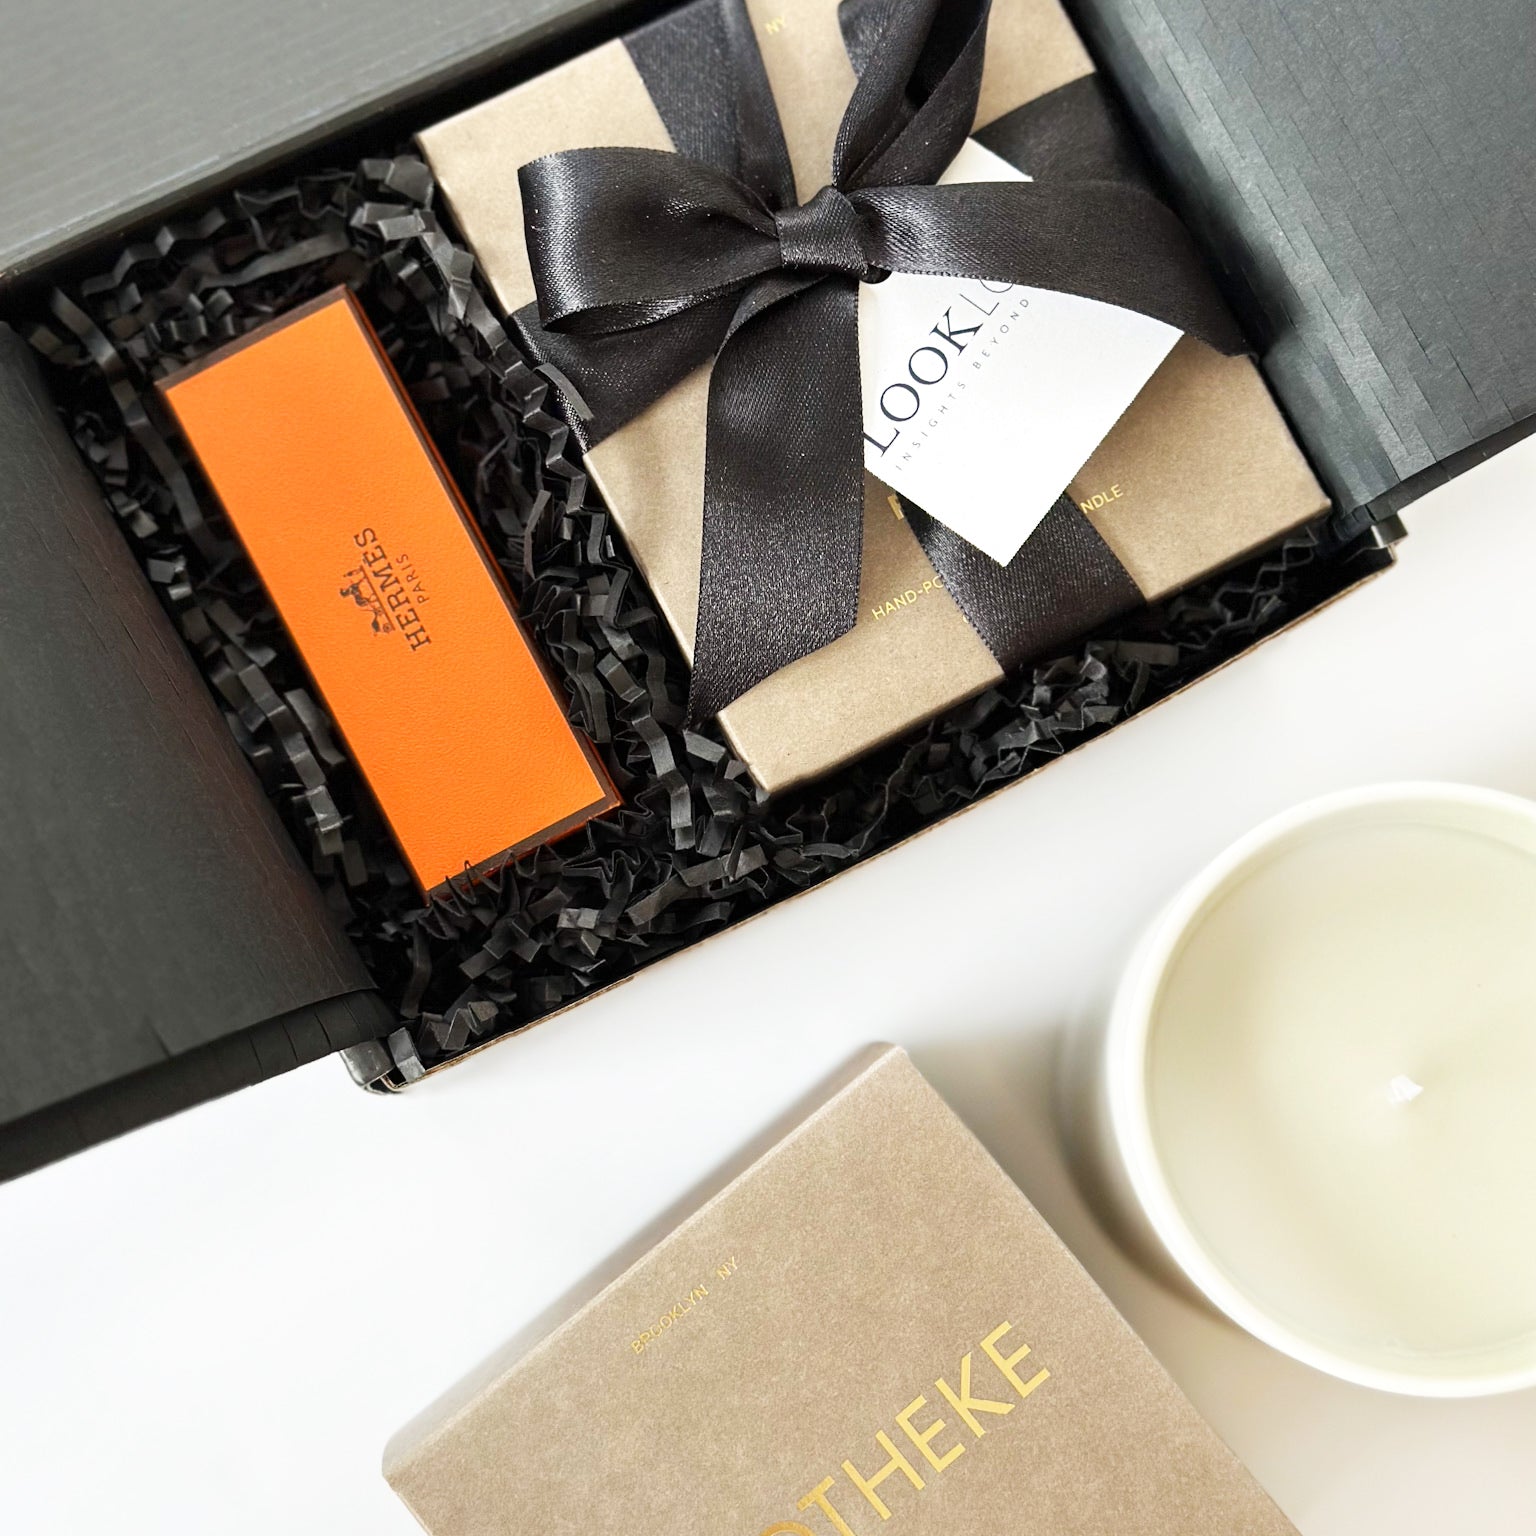 custom corporate luxury gifts with apotheke candle, hermes lipstick and more